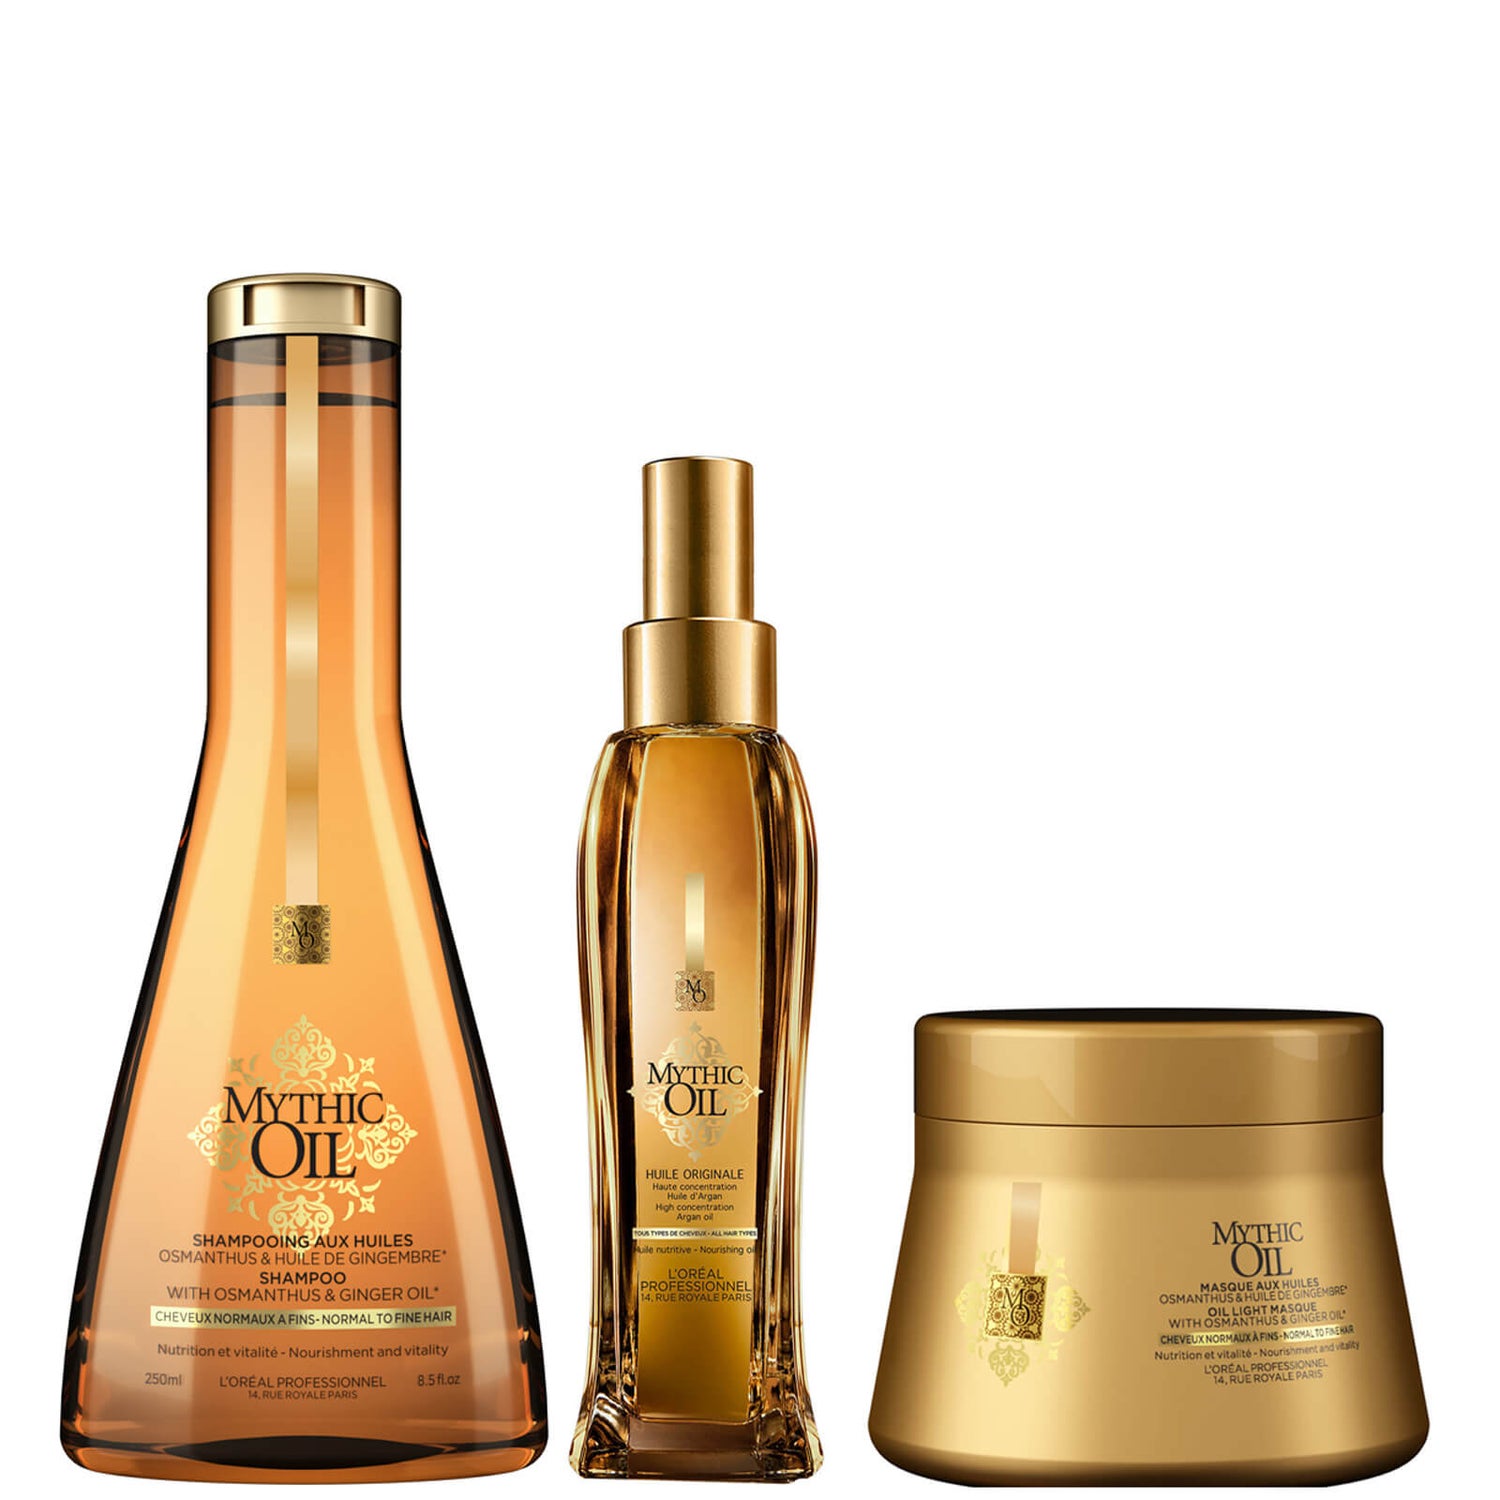 L'Oréal Professionnel Mythic Oil Shampoo, Masque and Oil Trio for Normal/Fine Hair